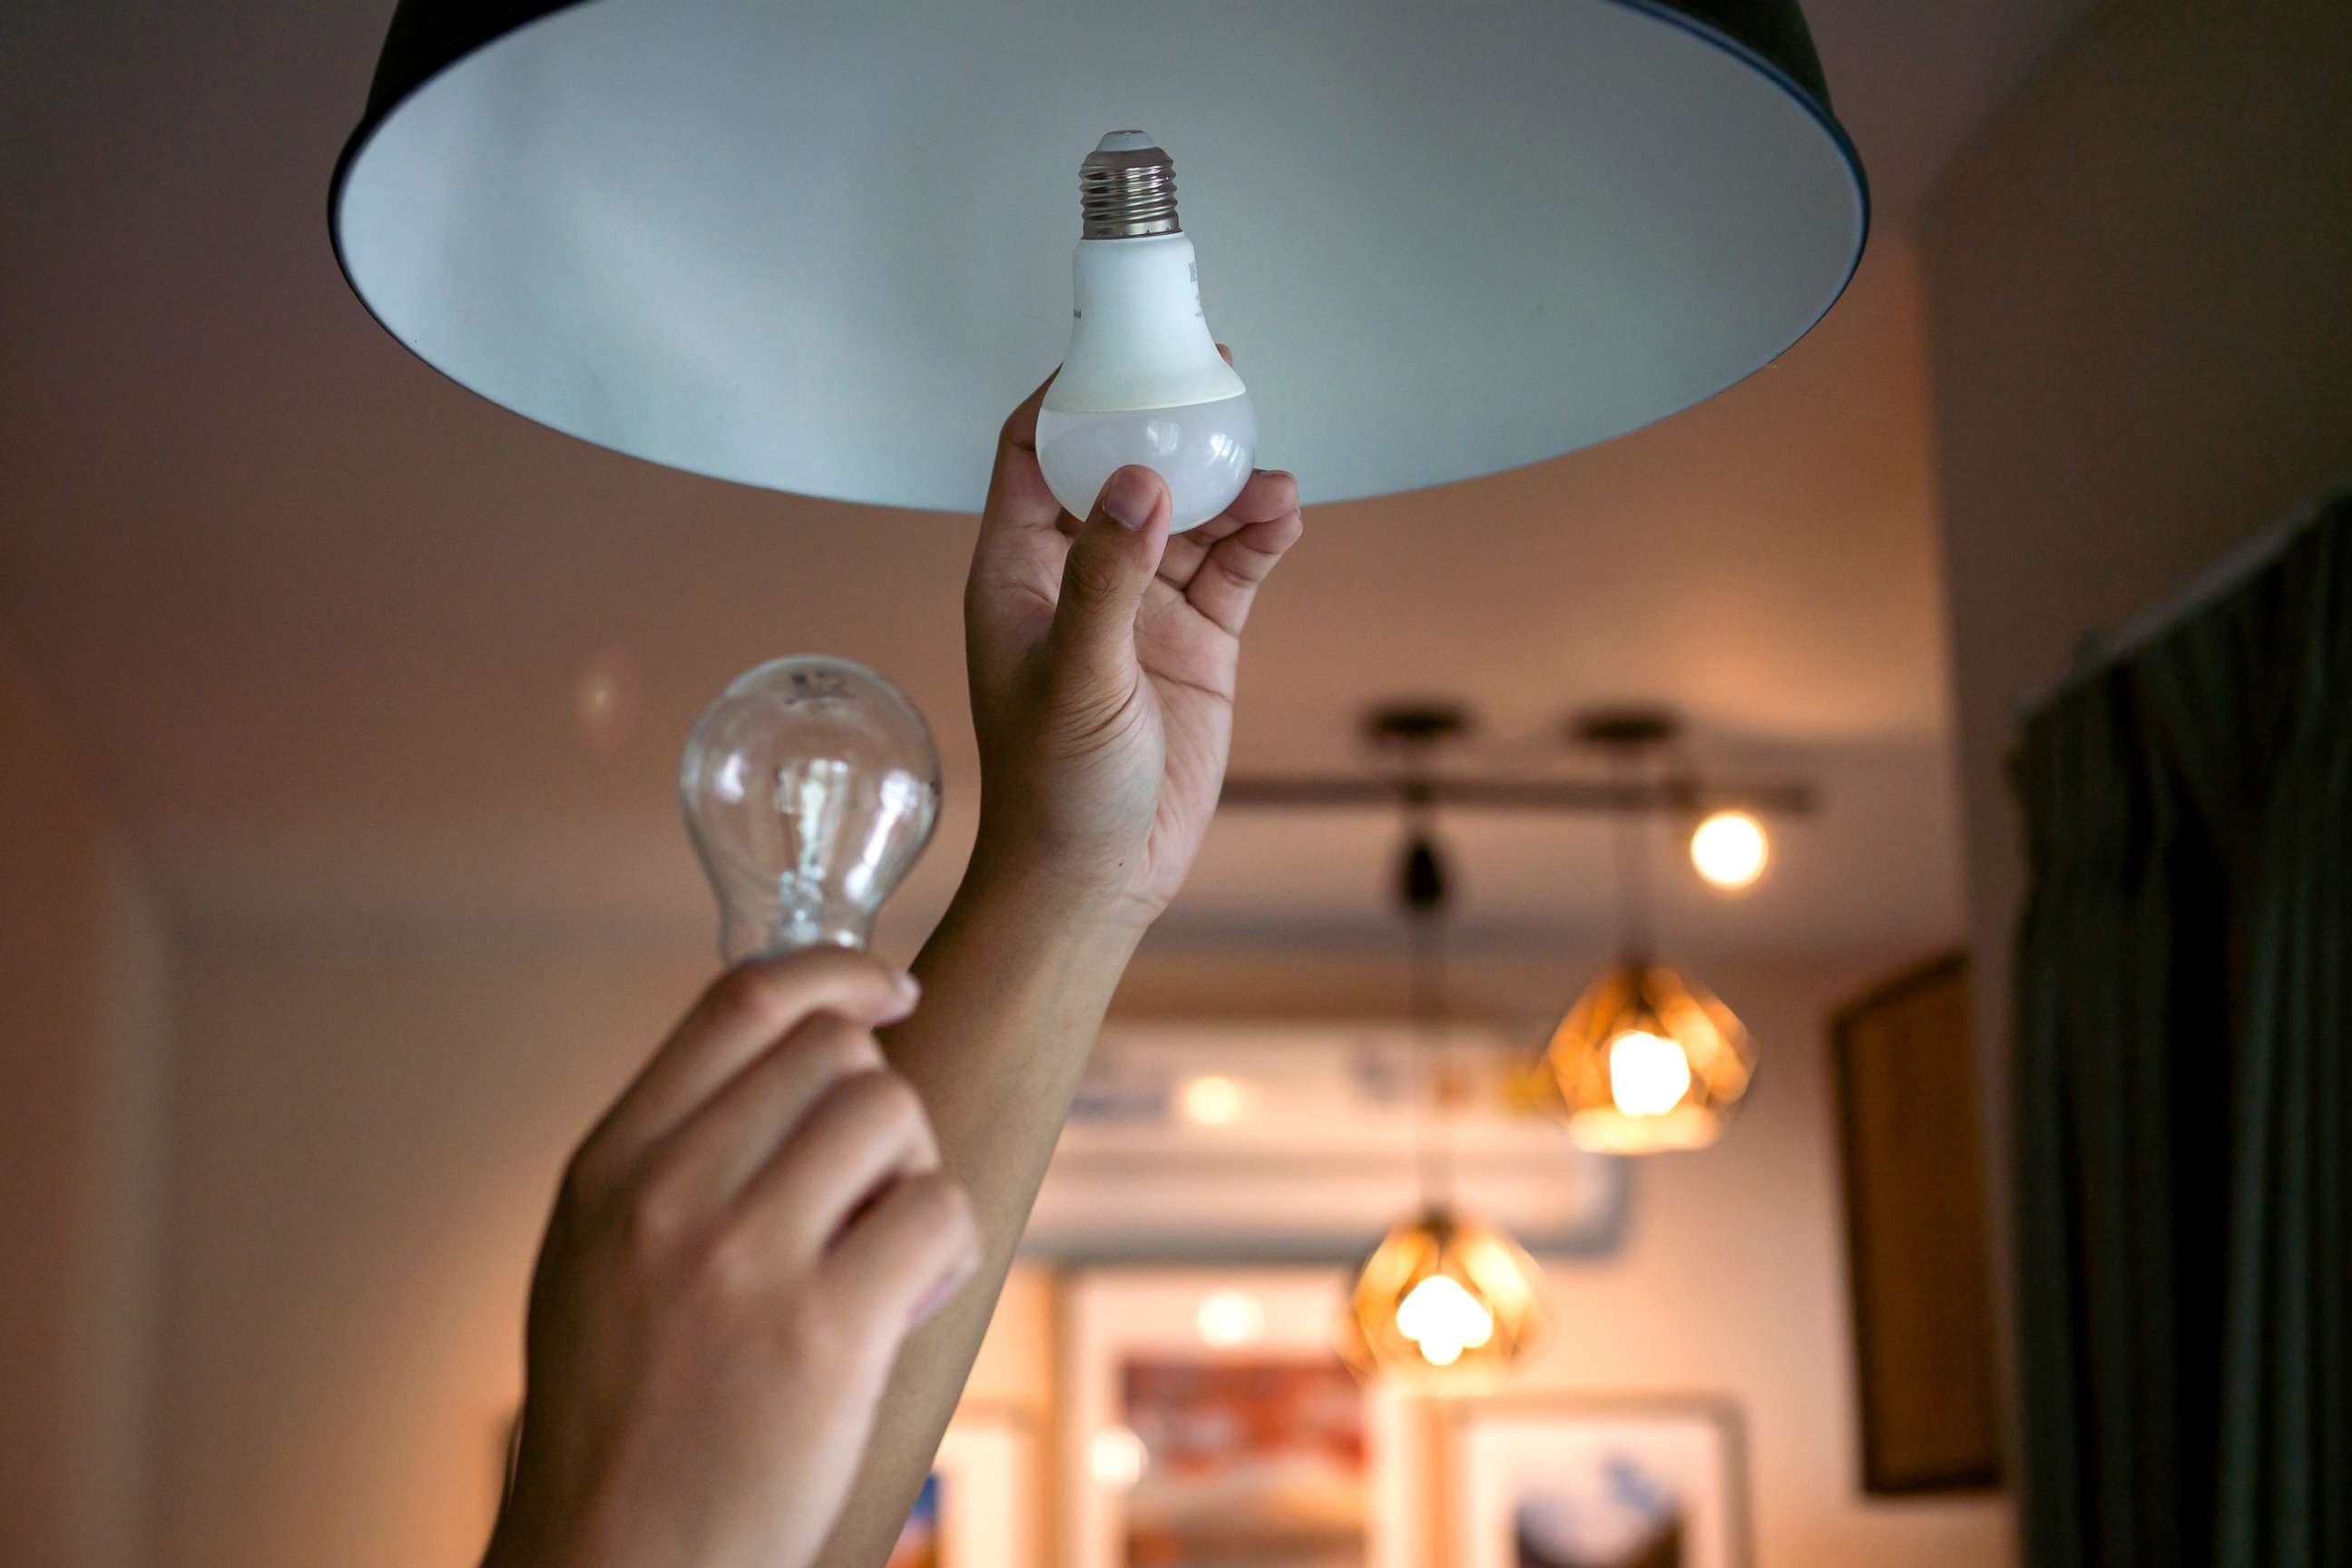 PHOTO: Replacing an incandescent light bulb with an energy efficient LED bulb.